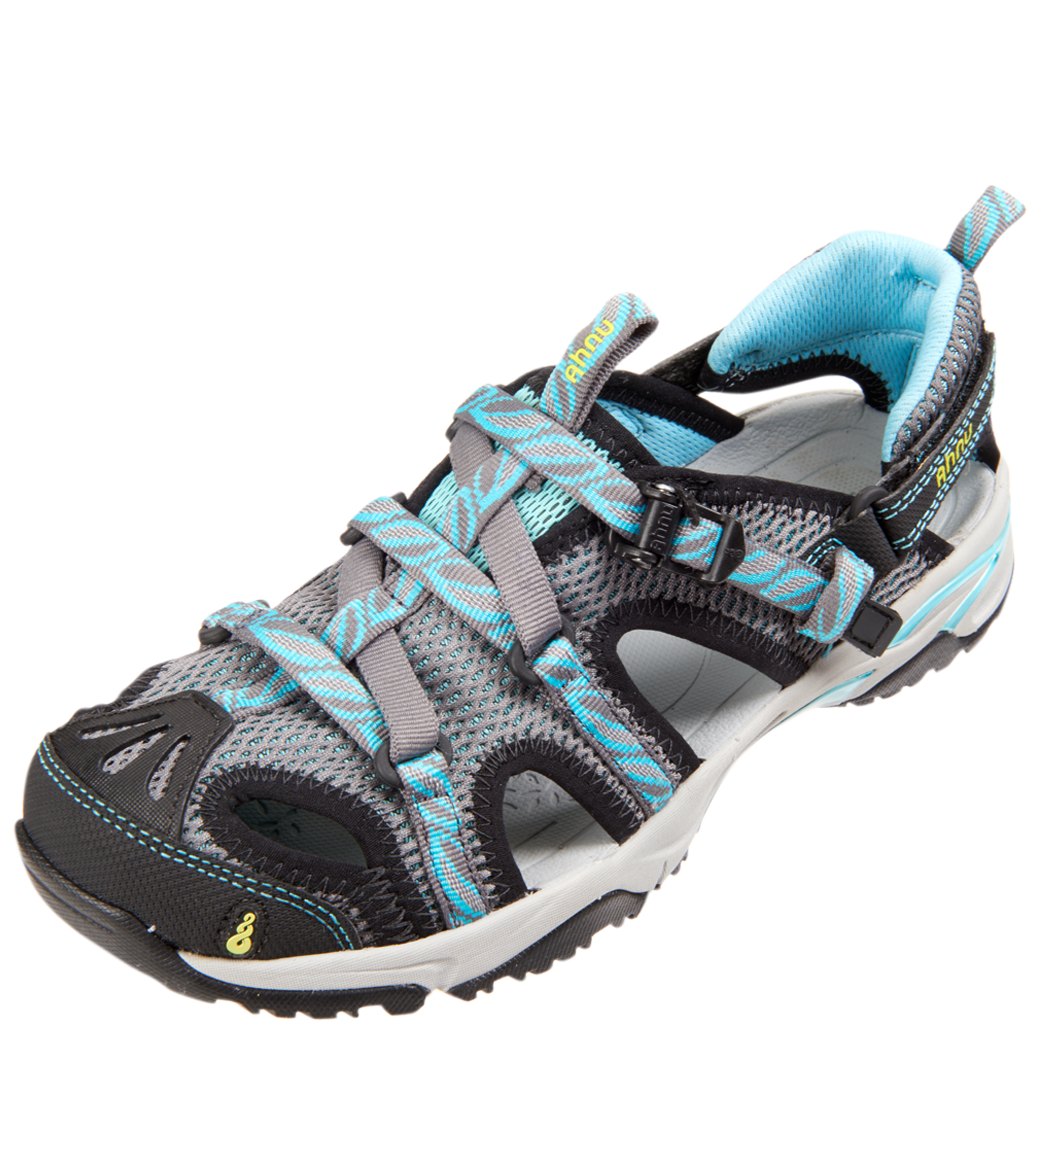 Ahnu Women's Tilden V Water Shoes at SwimOutlet.com - Free Shipping